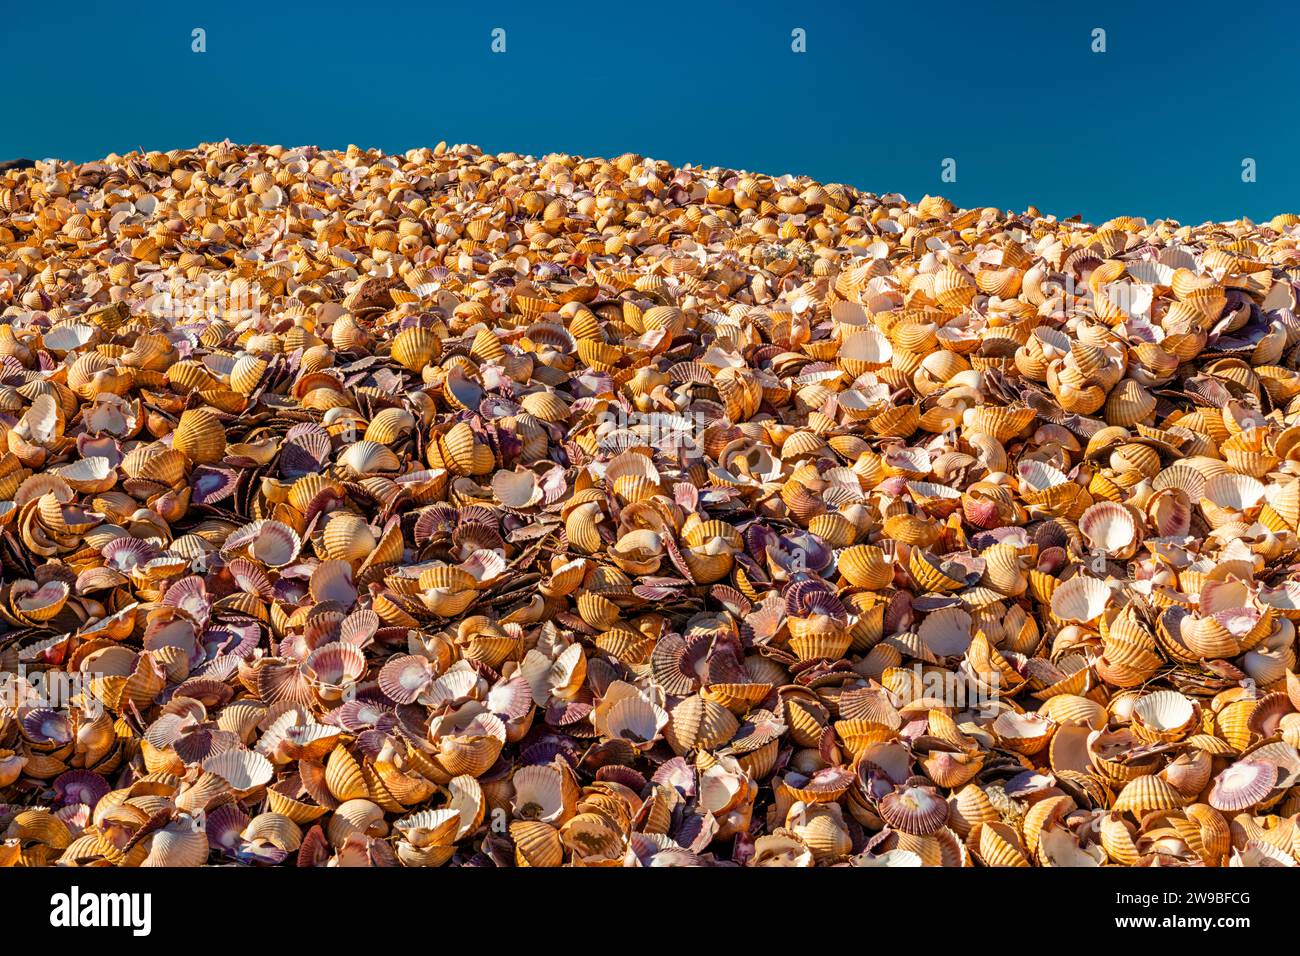 Full frame of shells of Pacific calico scallop Stock Photo